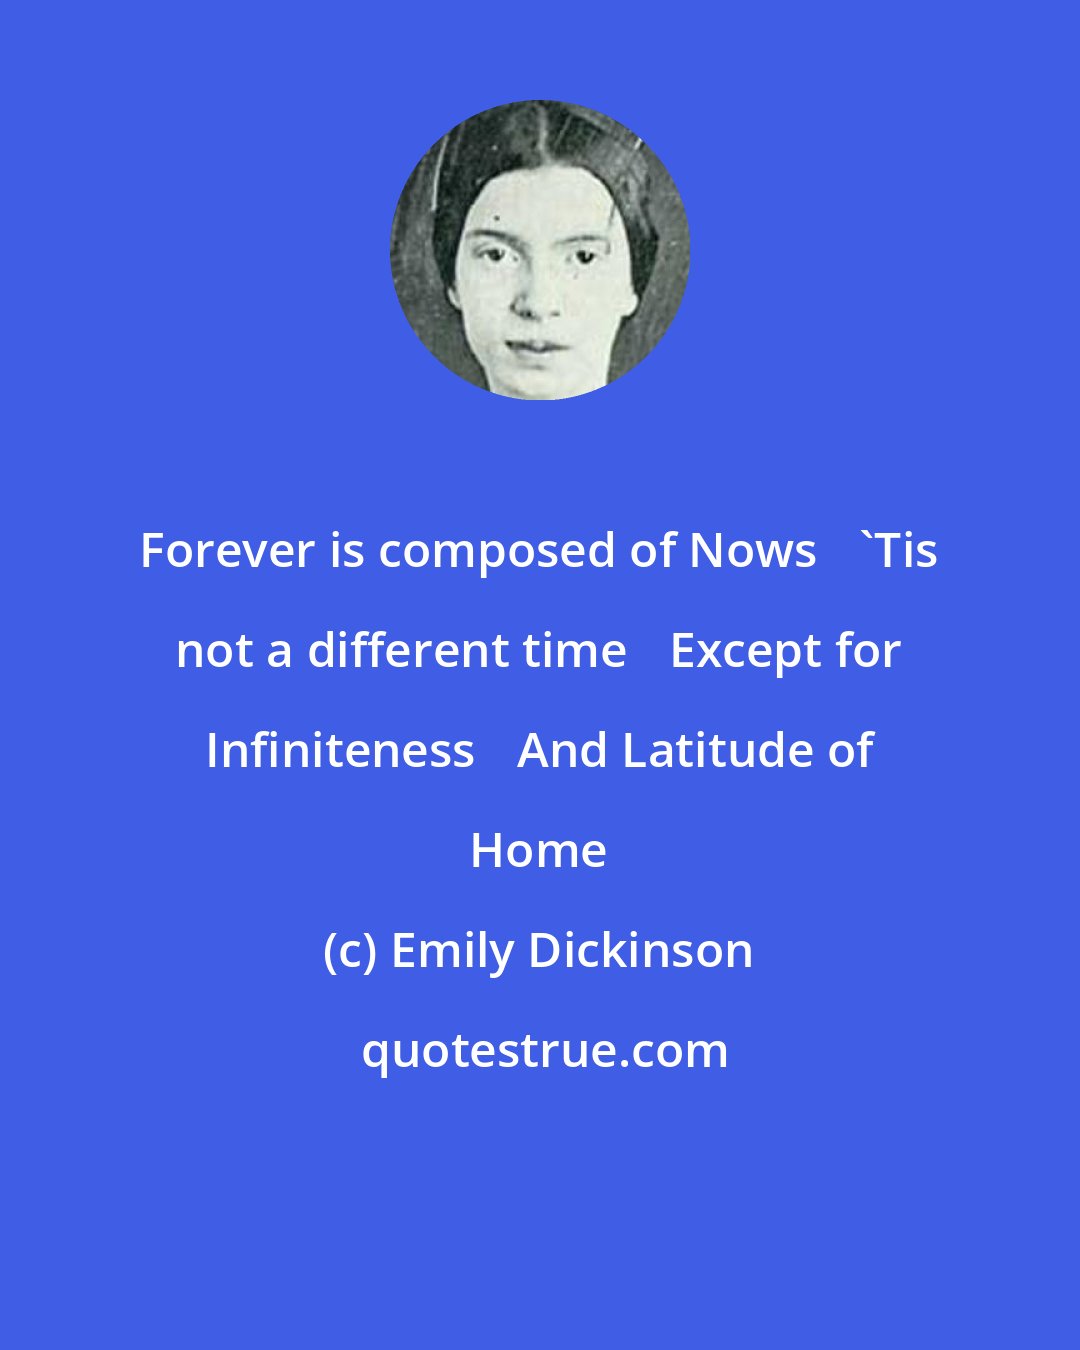 Emily Dickinson: Forever is composed of Nows 'Tis not a different time Except for Infiniteness And Latitude of Home